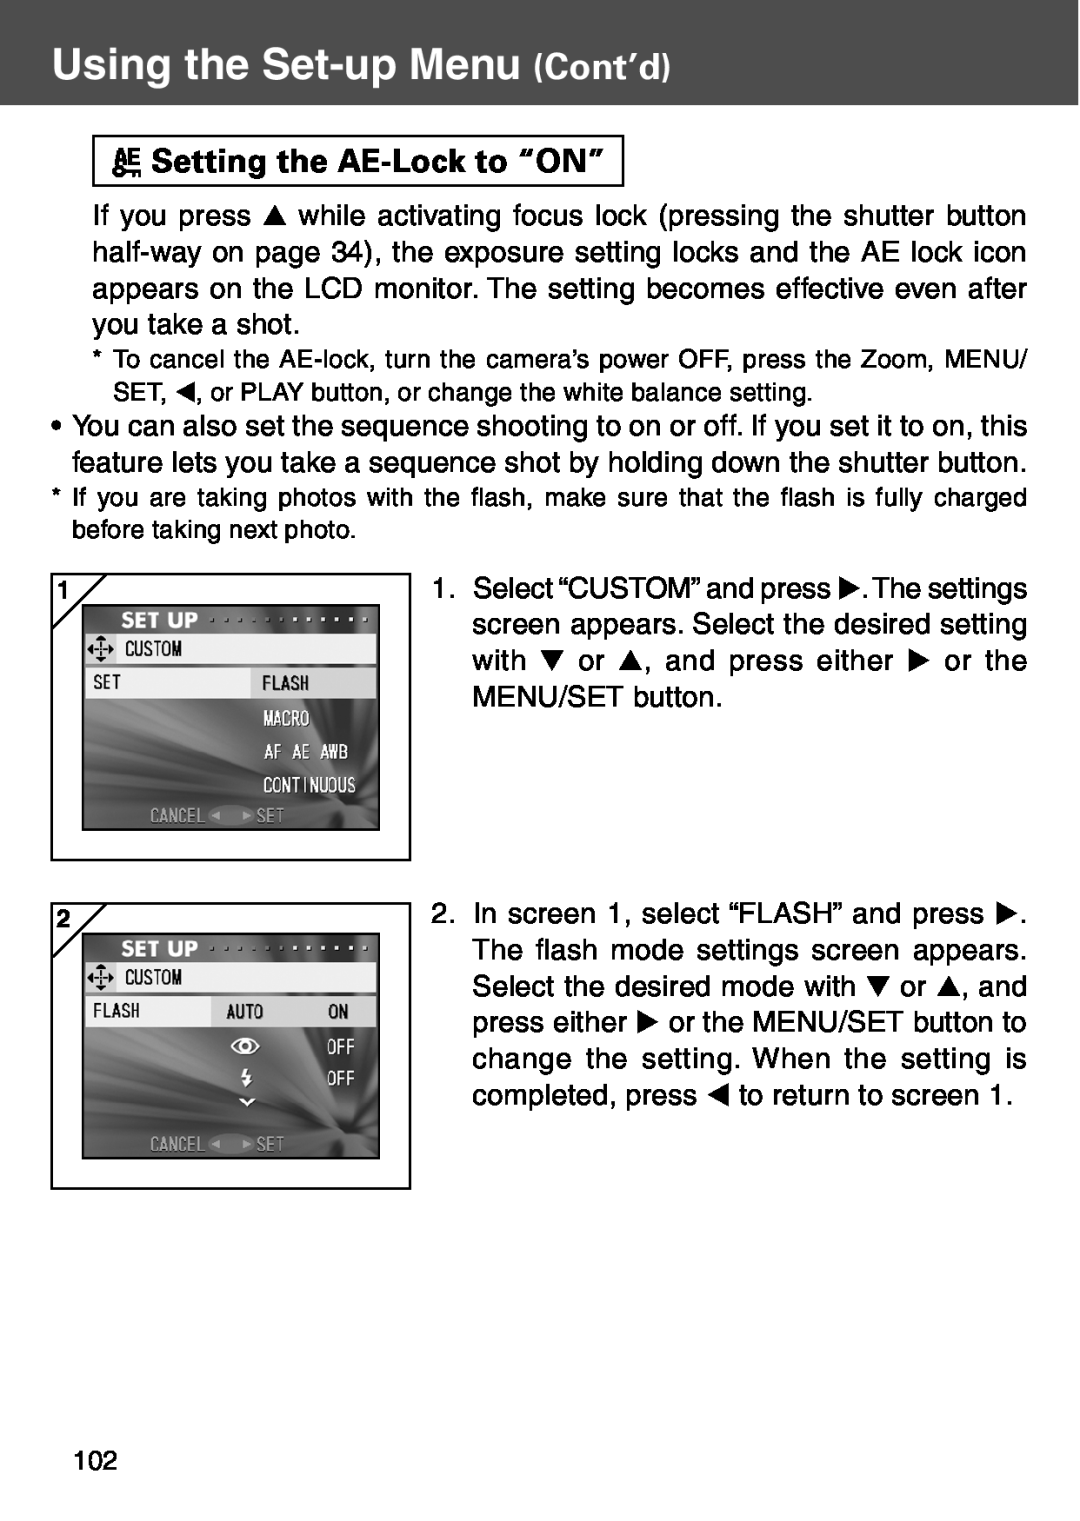 Konica Minolta KD-500Z user manual Setting the AE-Lock to “ON”, Using the Set-up Menu Cont’d 